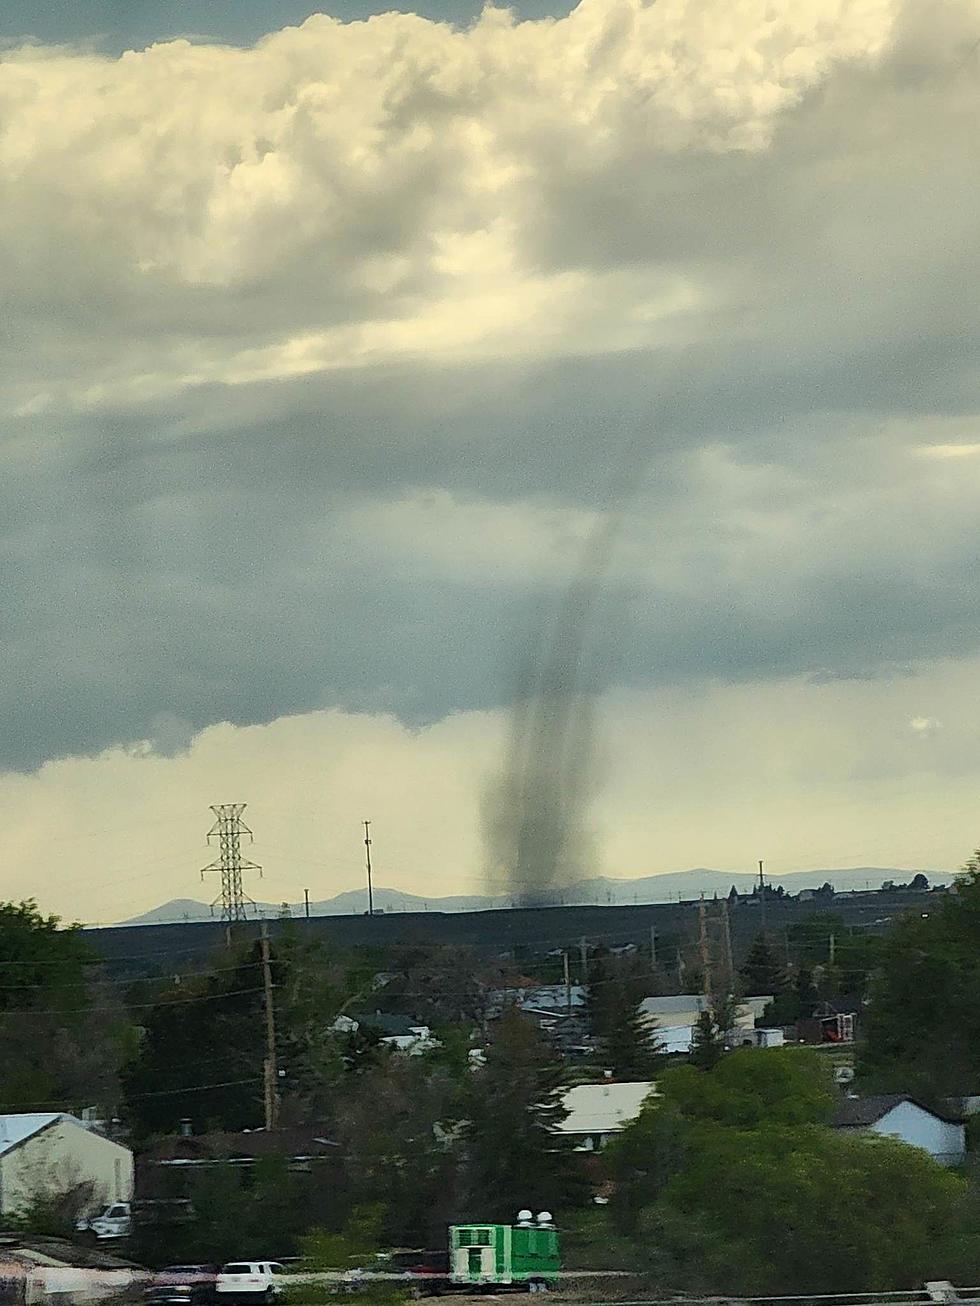 Cheyenne Residents Post Photos Of Twister Activity